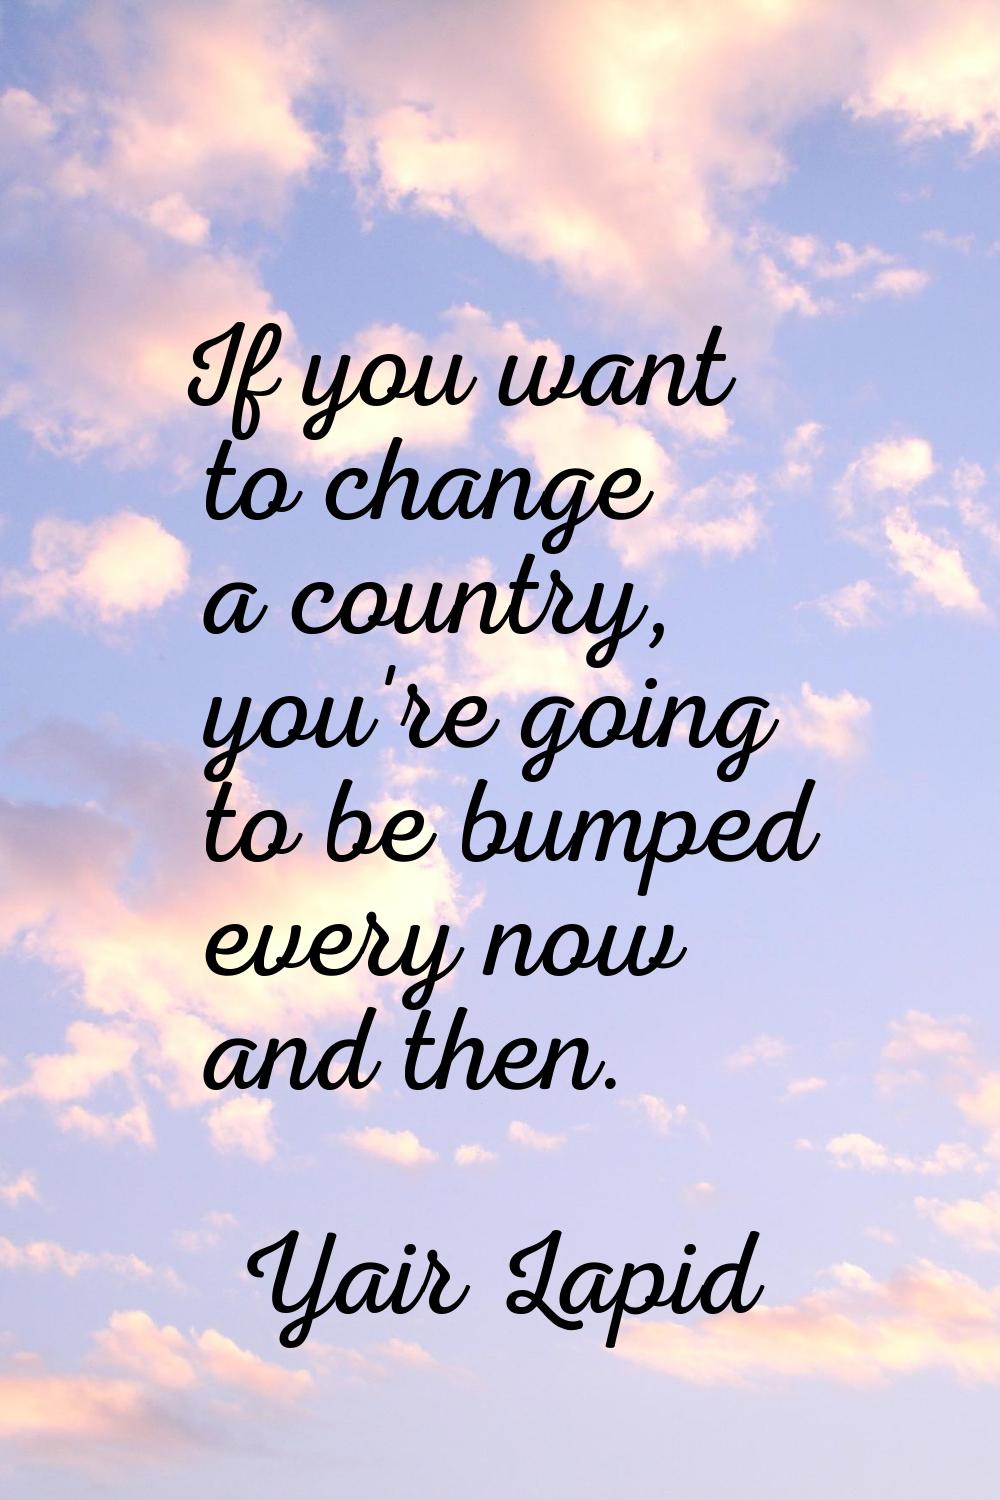 If you want to change a country, you're going to be bumped every now and then.